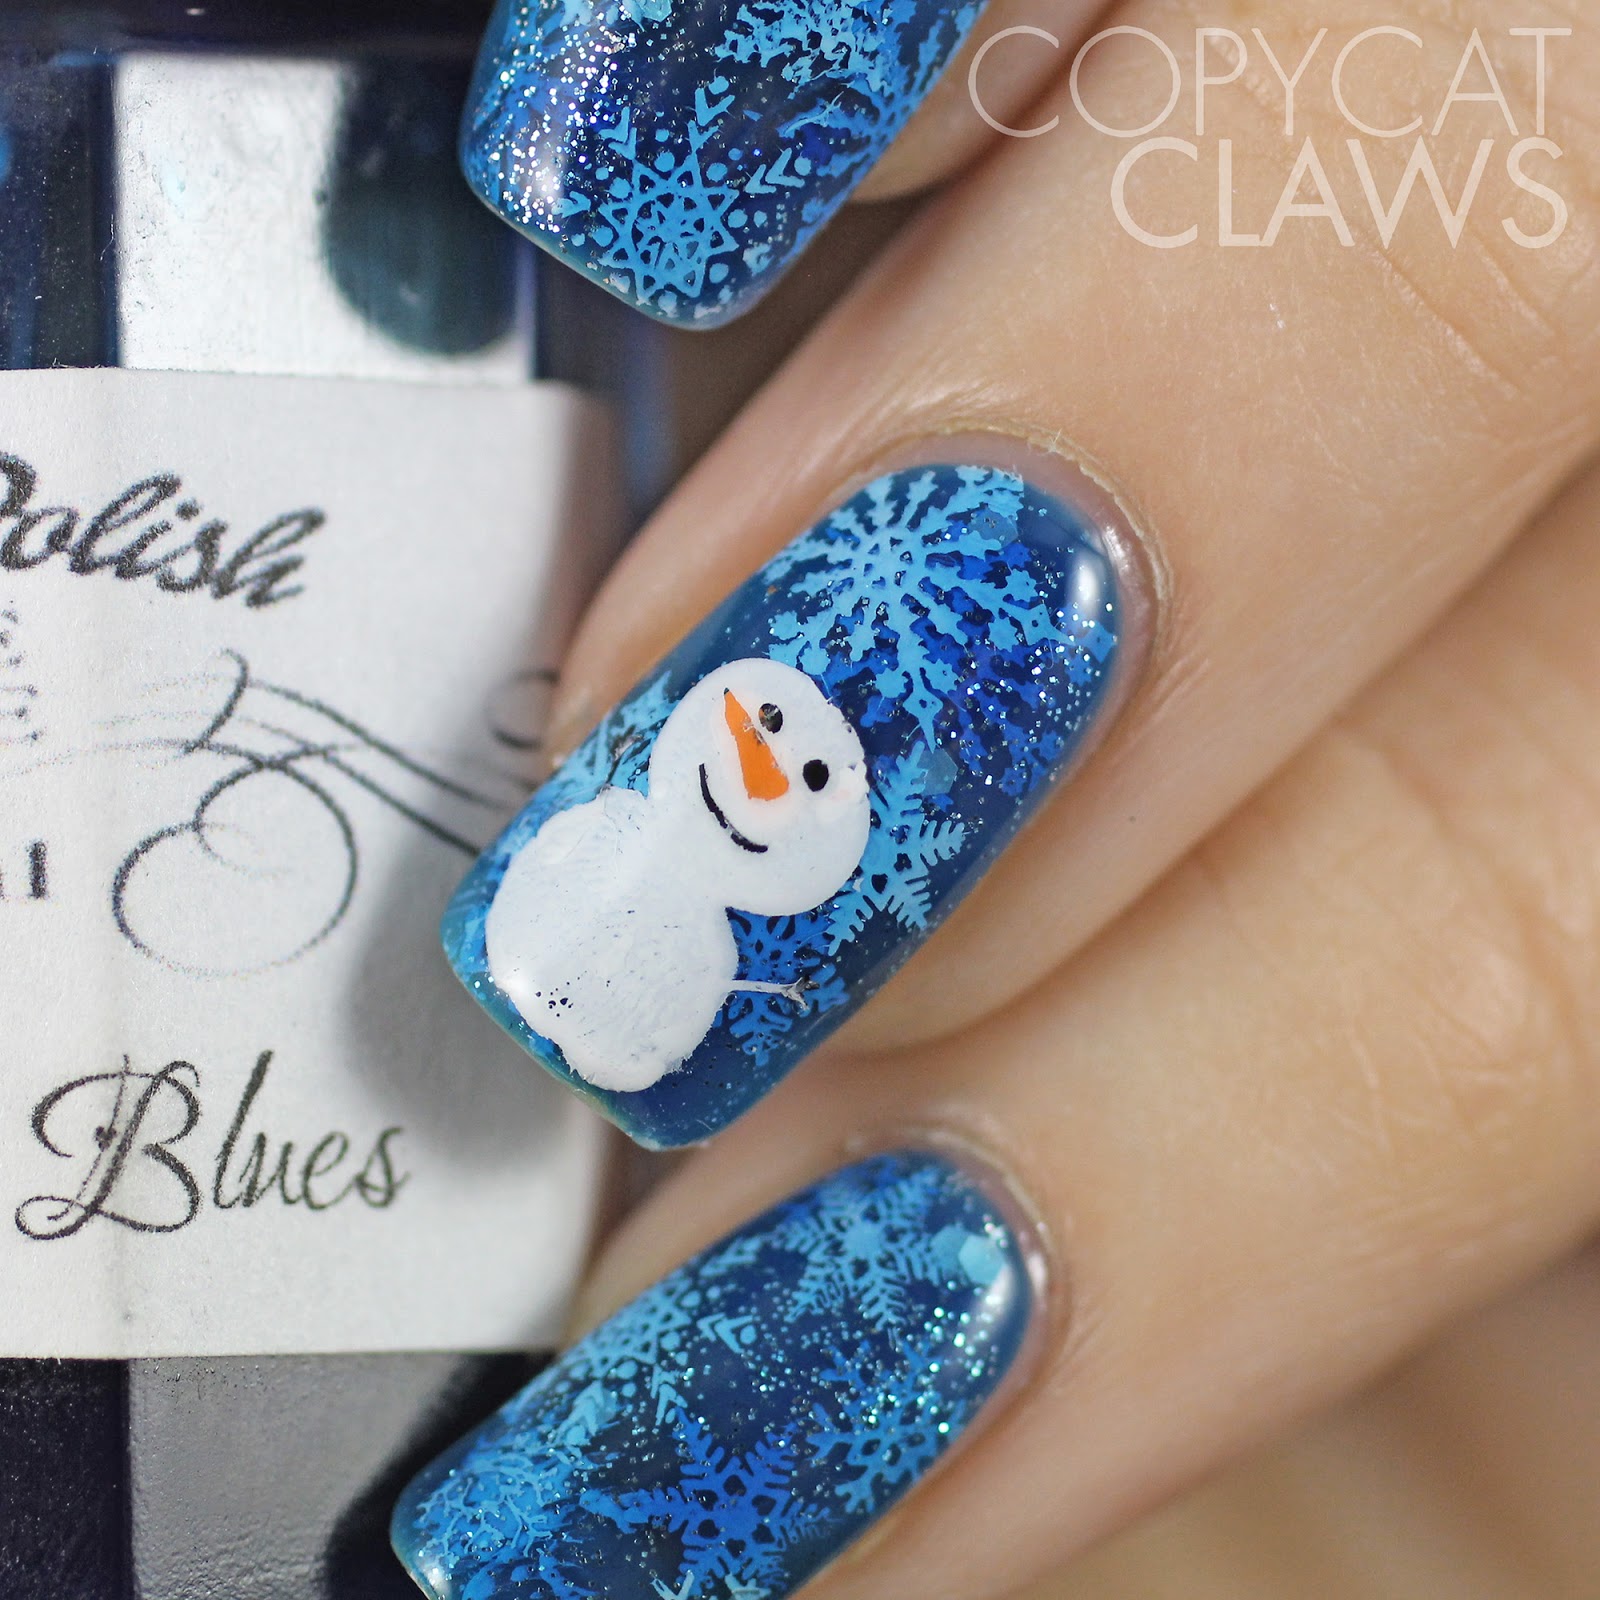 Copycat Claws: Sunday Stamping - Winter Memories